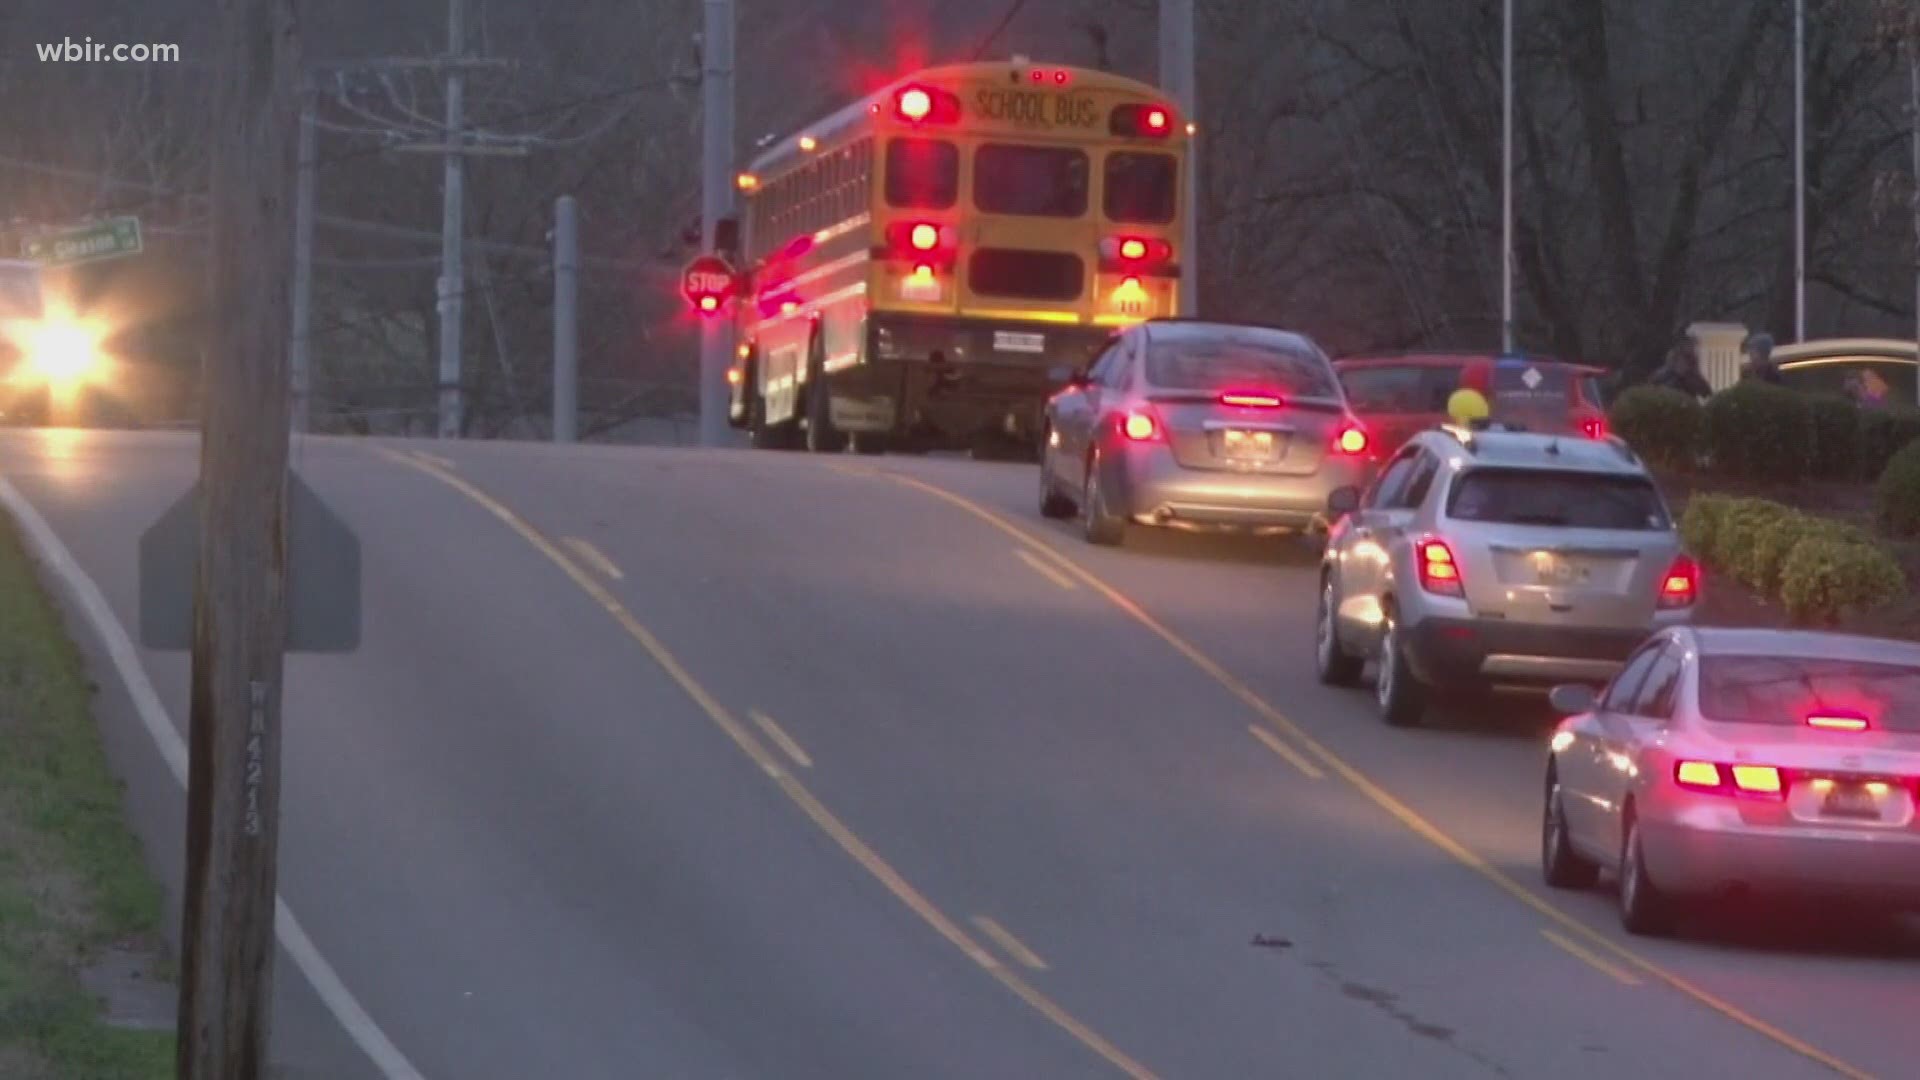 THE KNOX COUNTY SHERIFF'S OFFICE says the CLAIMS REPORTED BY A BUS DRIVER are not true.